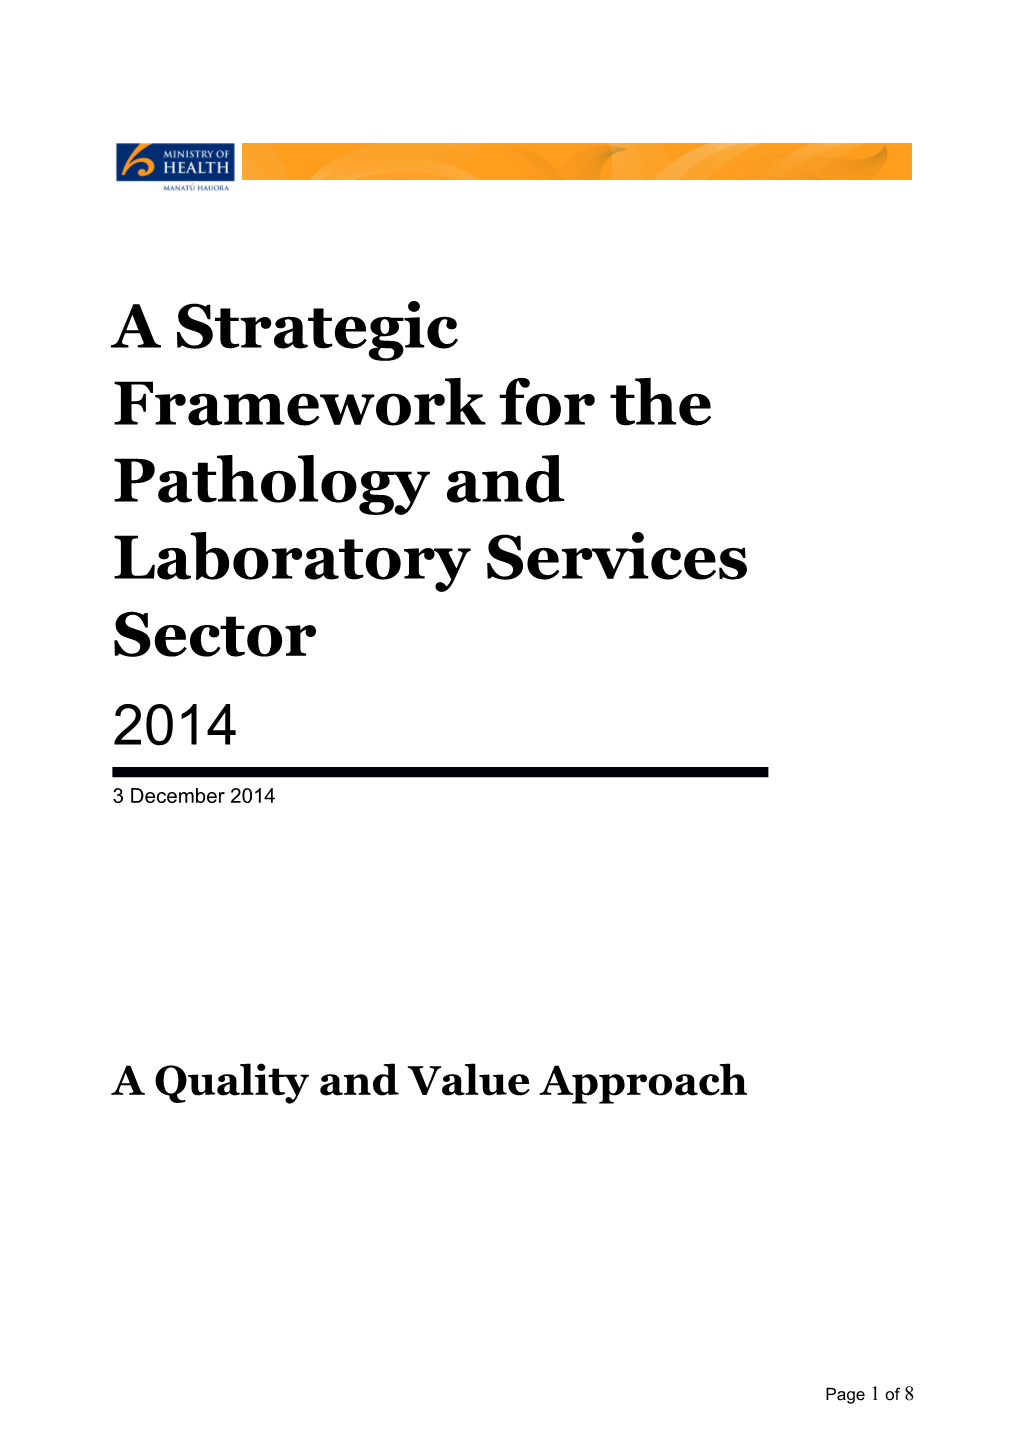 A Strategic Framework for the Pathology and Laboratory Services Sector 2014